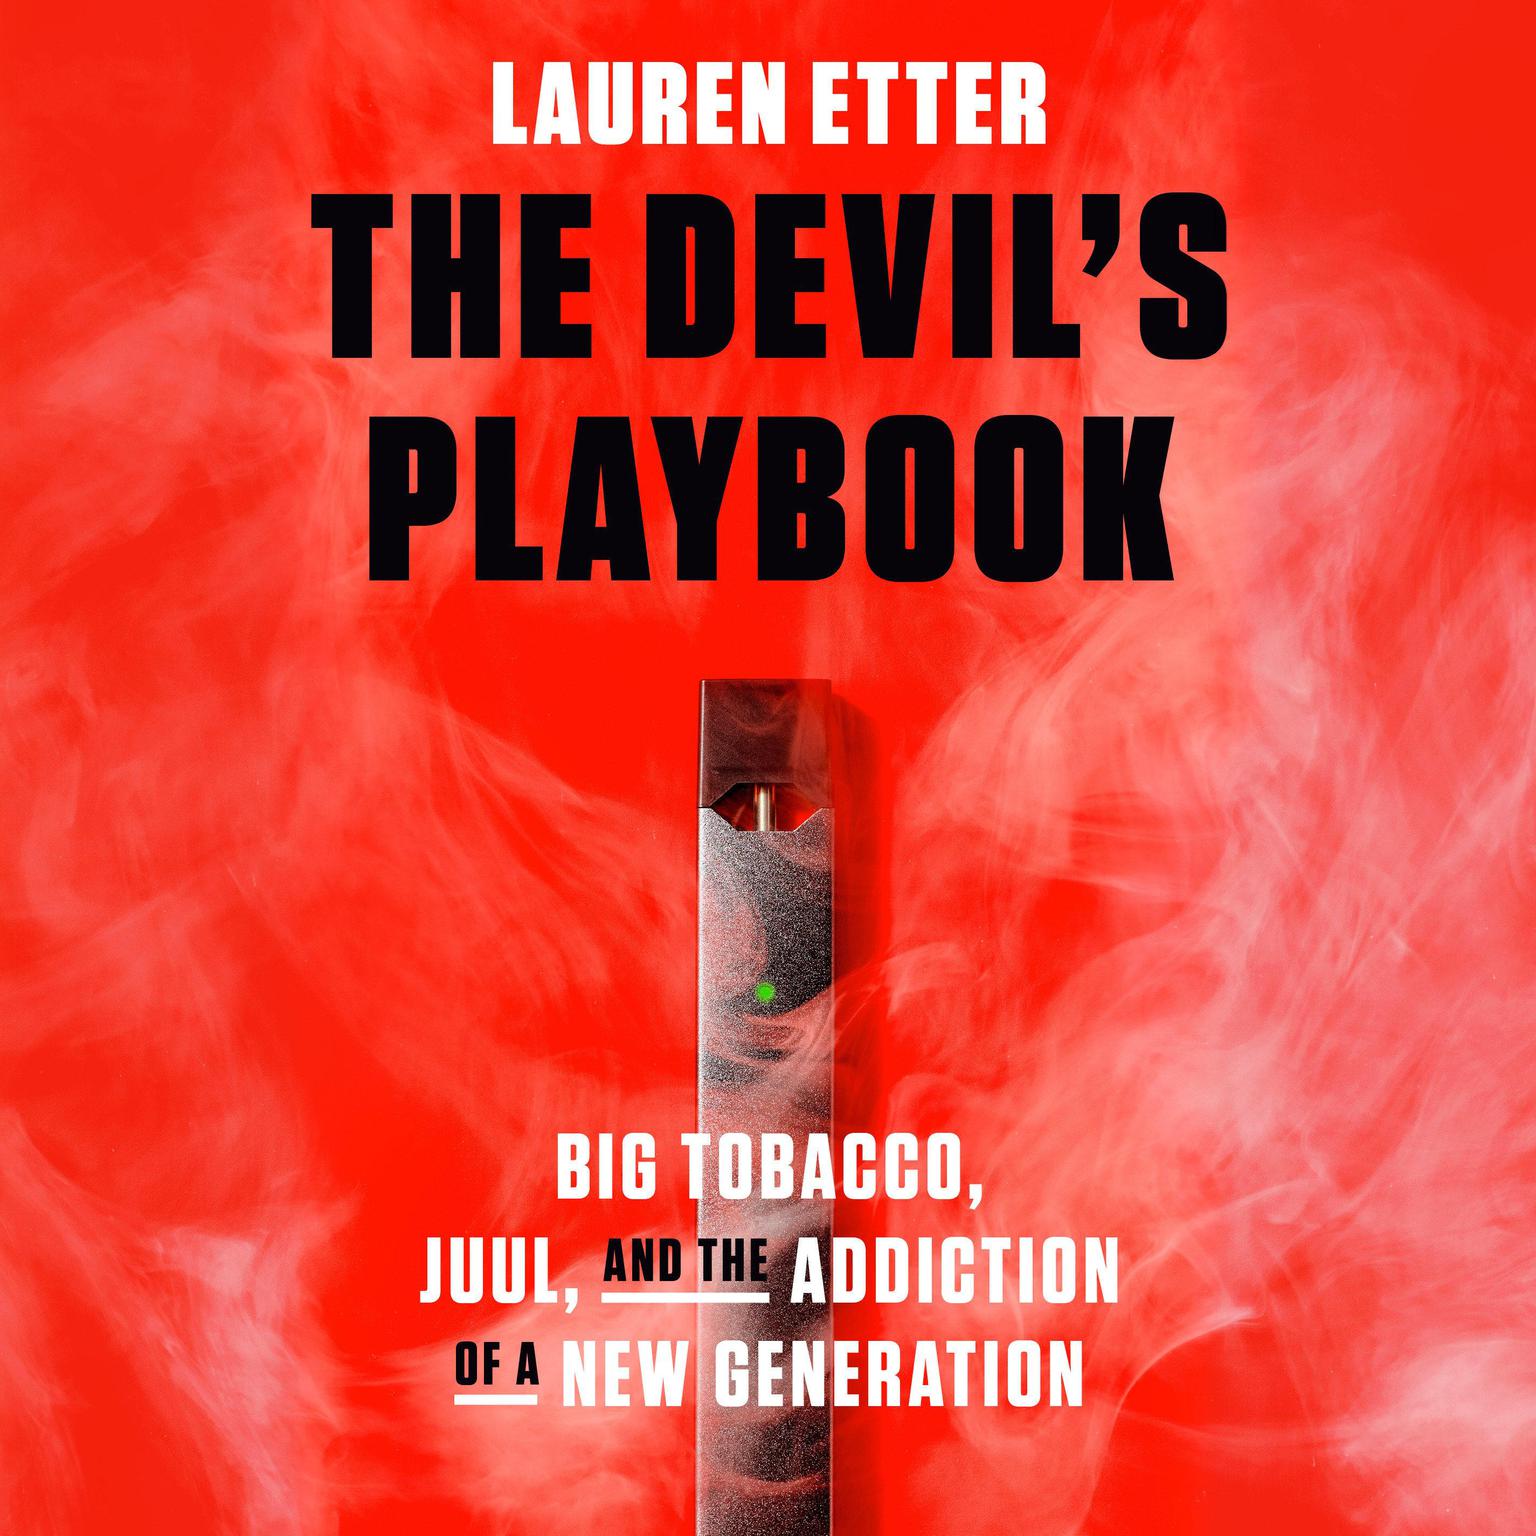 The Devils Playbook: Big Tobacco, Juul, and the Addiction of a New Generation Audiobook, by Lauren Etter